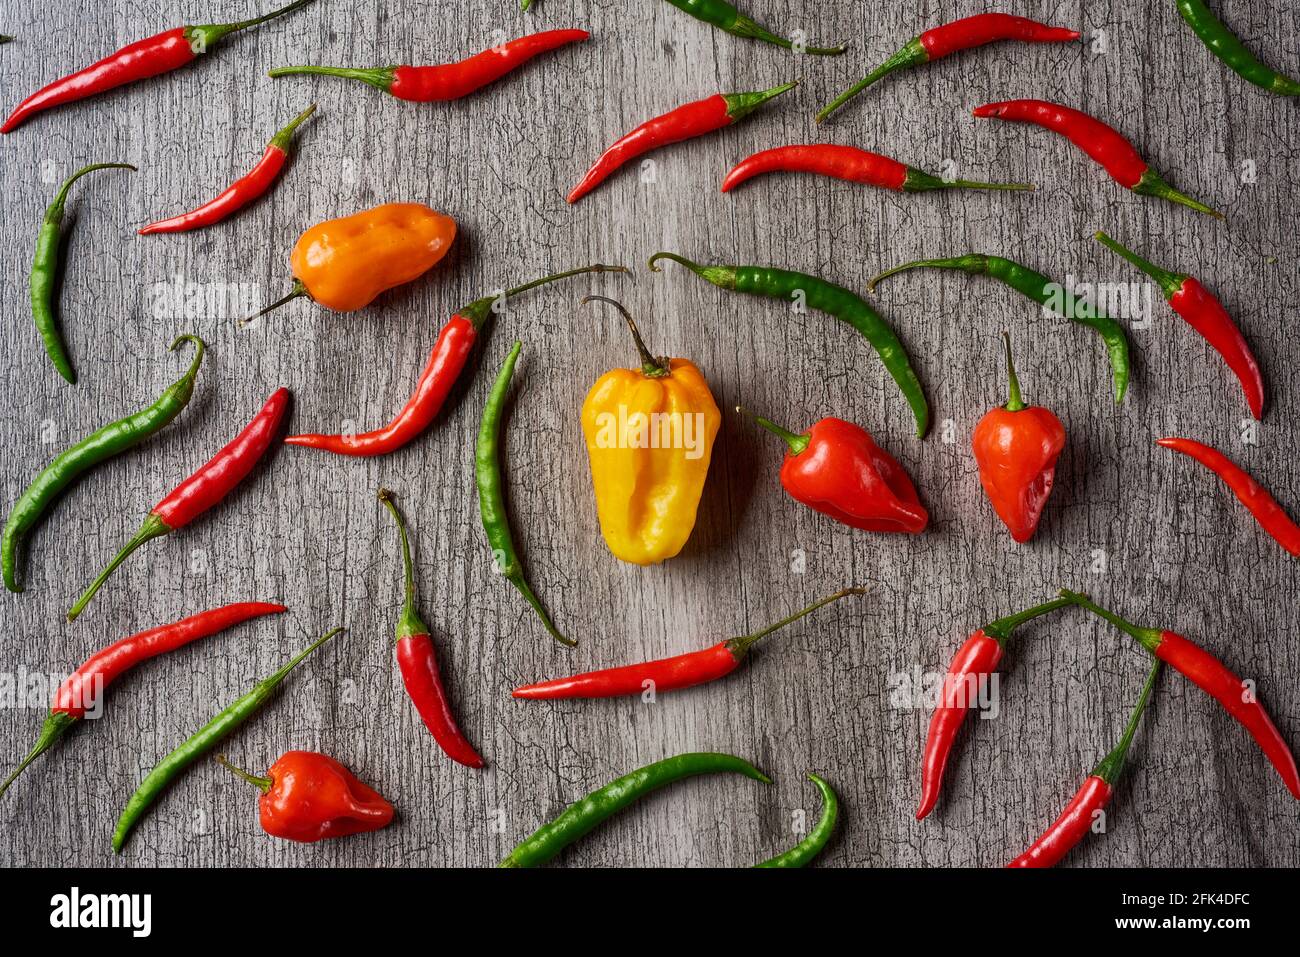 high angle view of an assortment of different chili peppers on a gray rustic wooden table Stock Photo